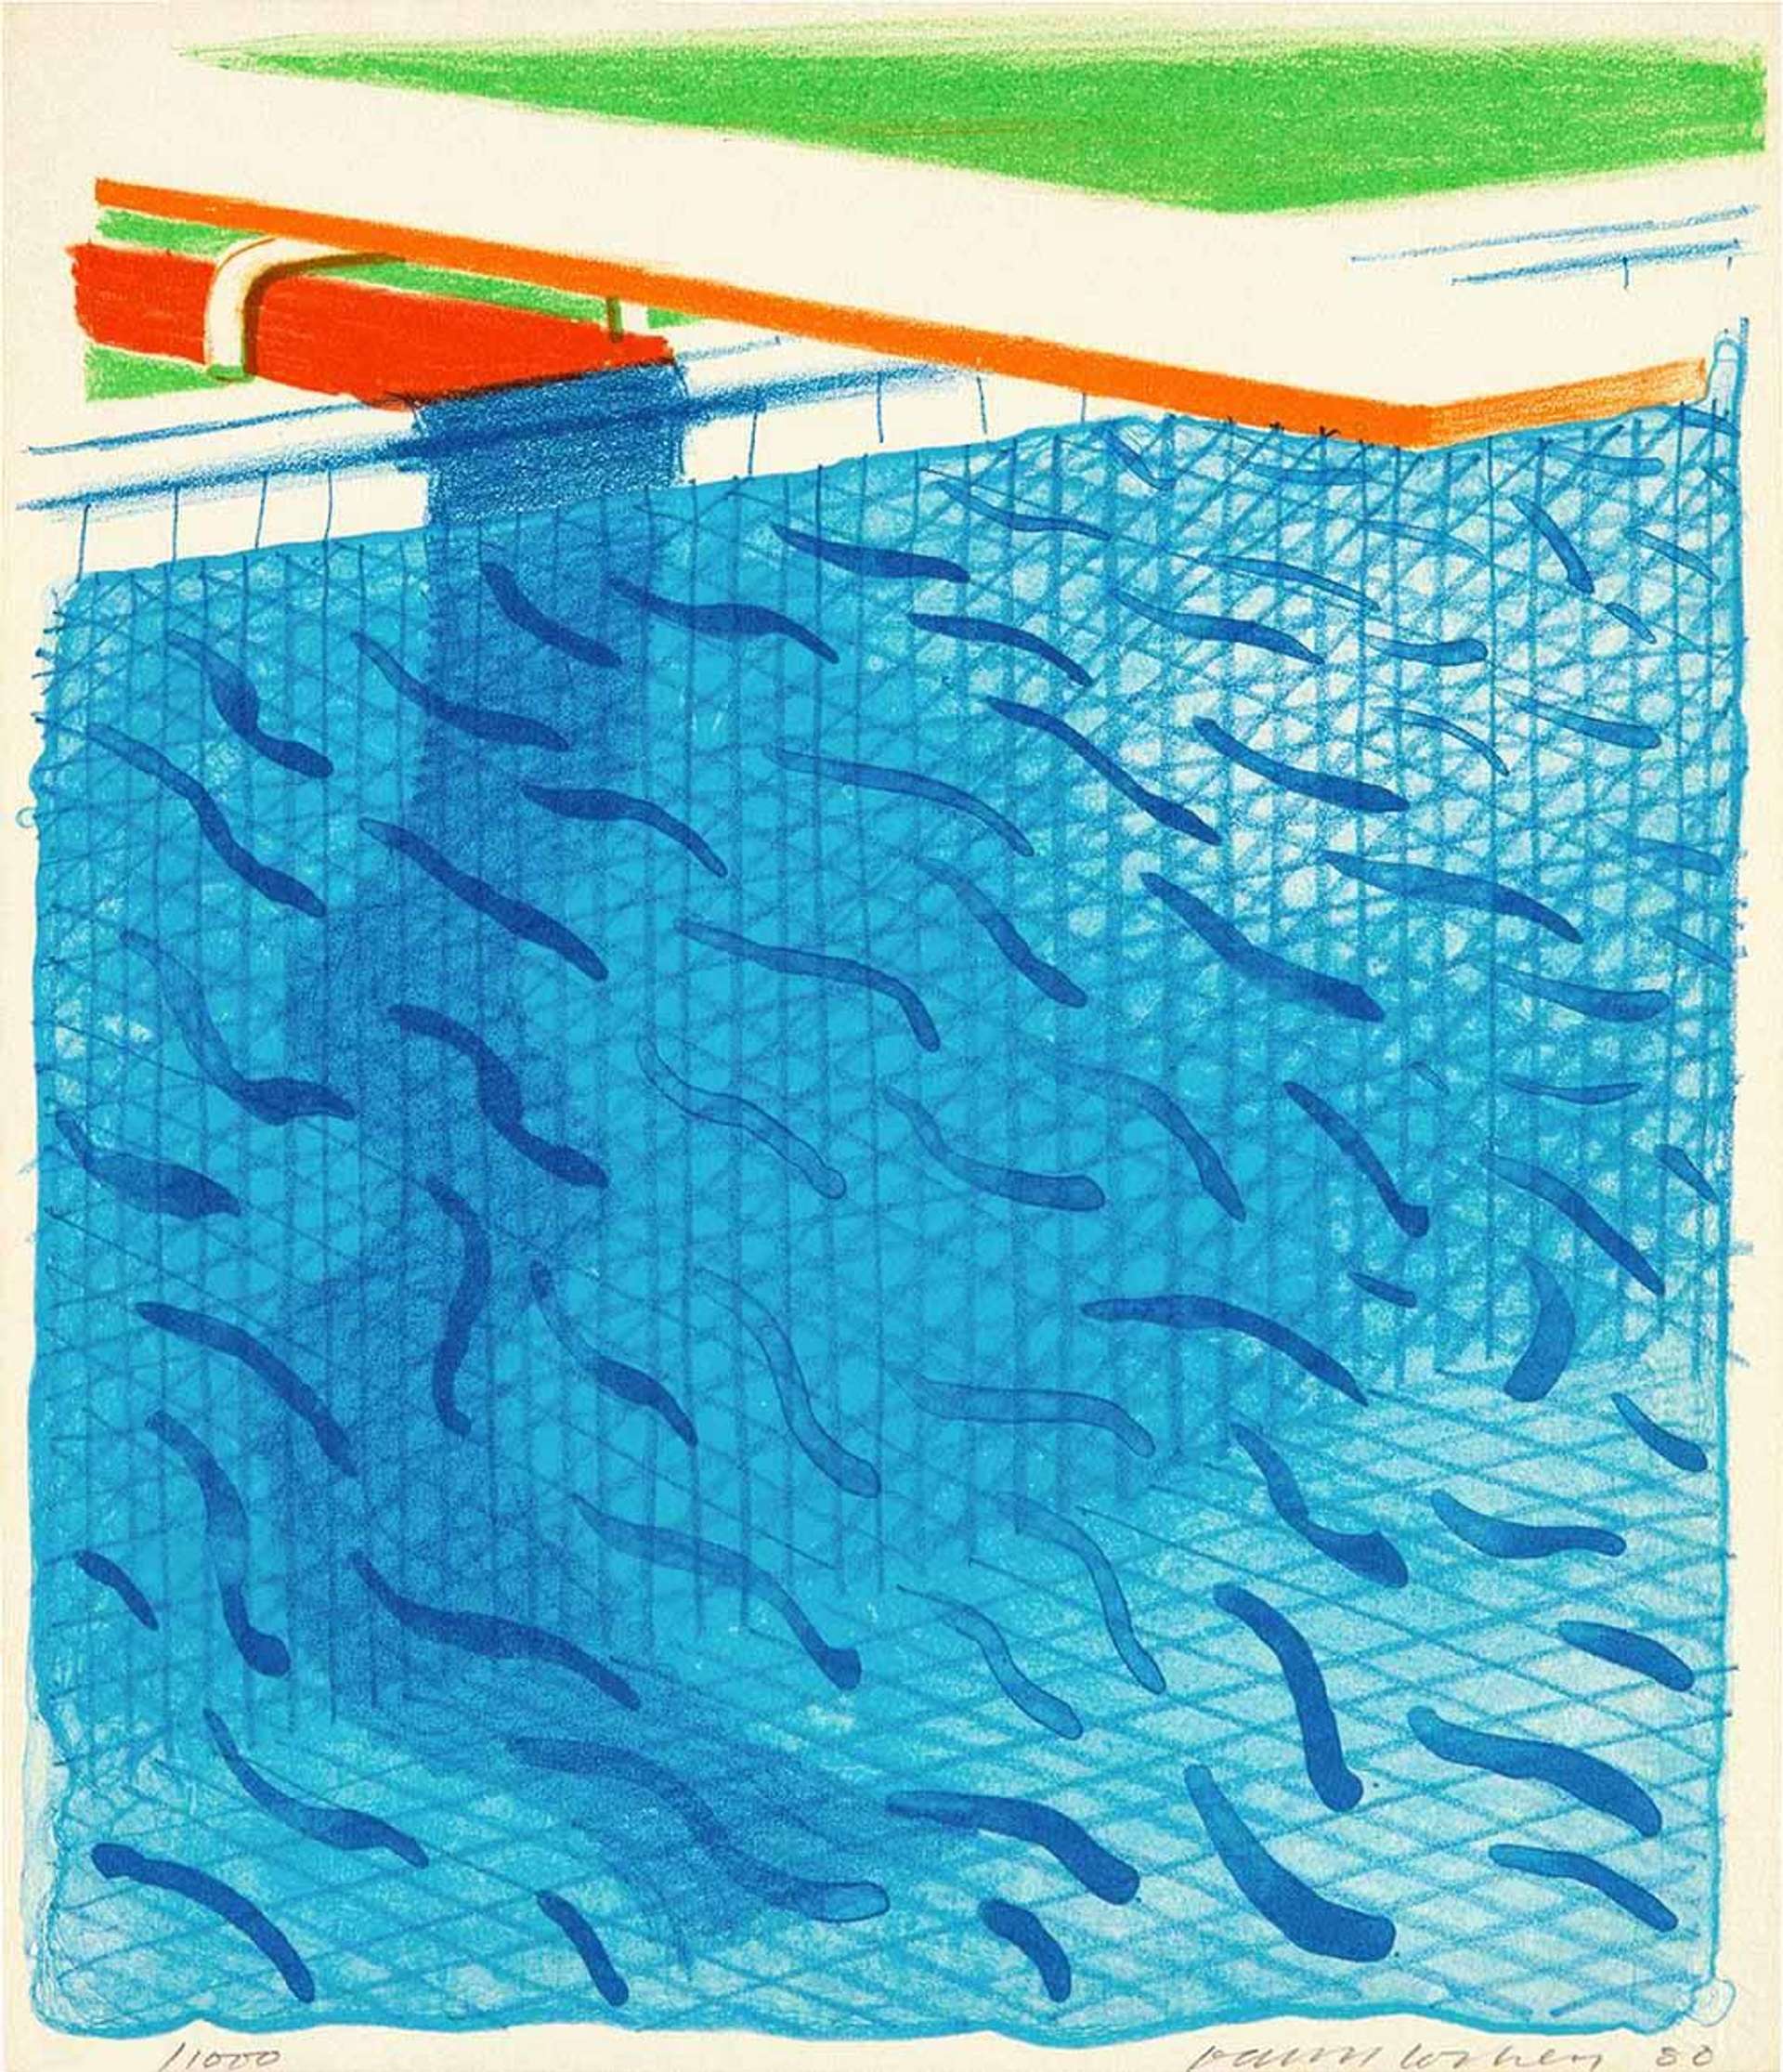 An image of the print Pool Made With Paper And Blue Ink For Book by artist David Hockney. It is a watercolour of a pool, bright and colourful.